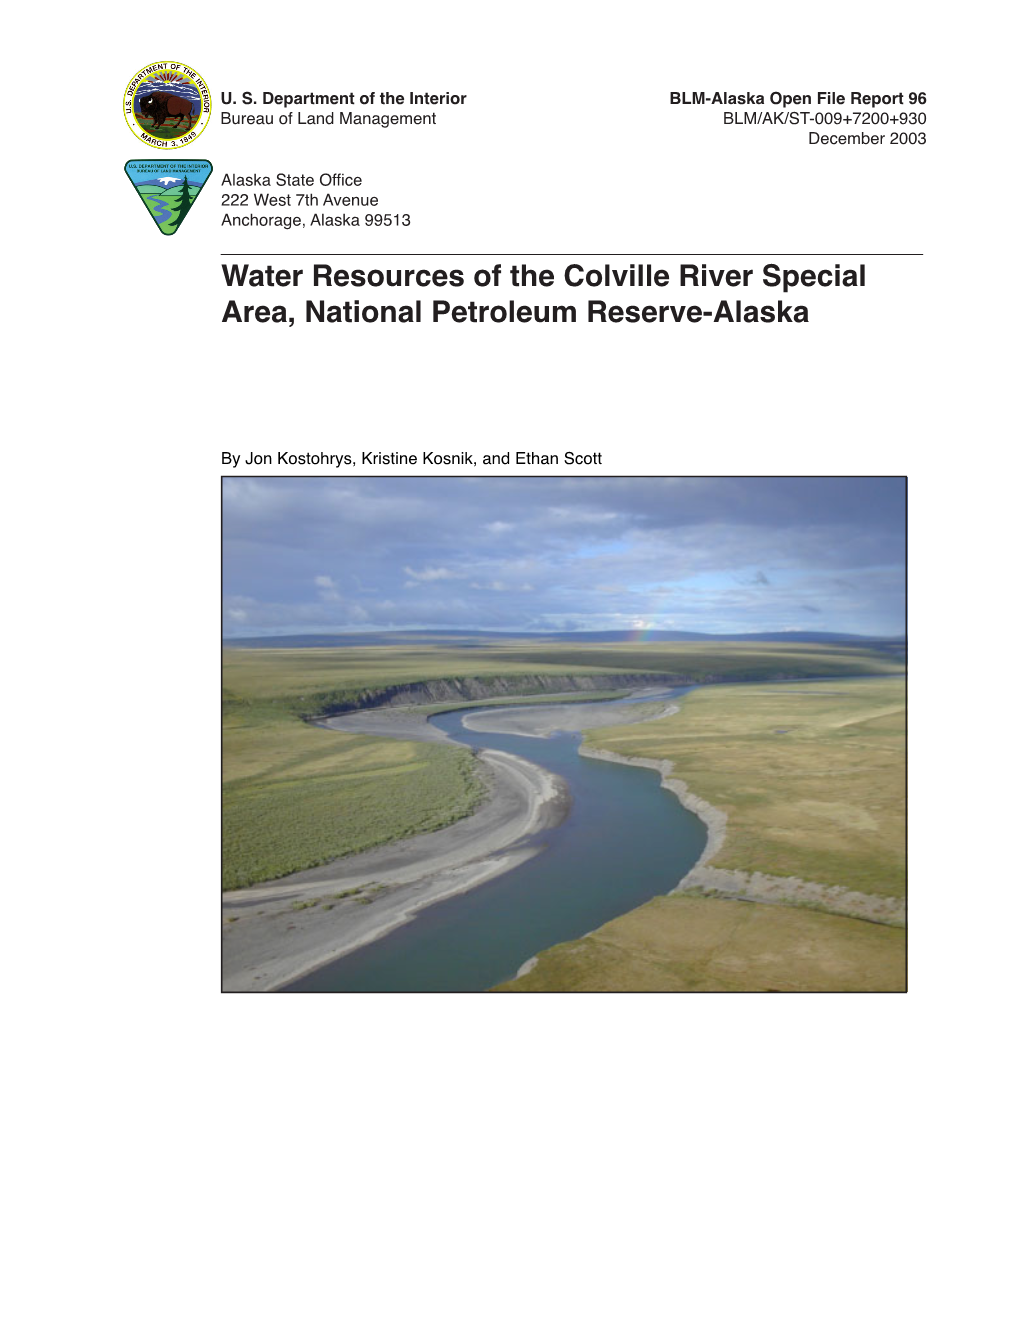 Water Resources of the Colville River Special Area, National Petroleum Reserve-Alaska